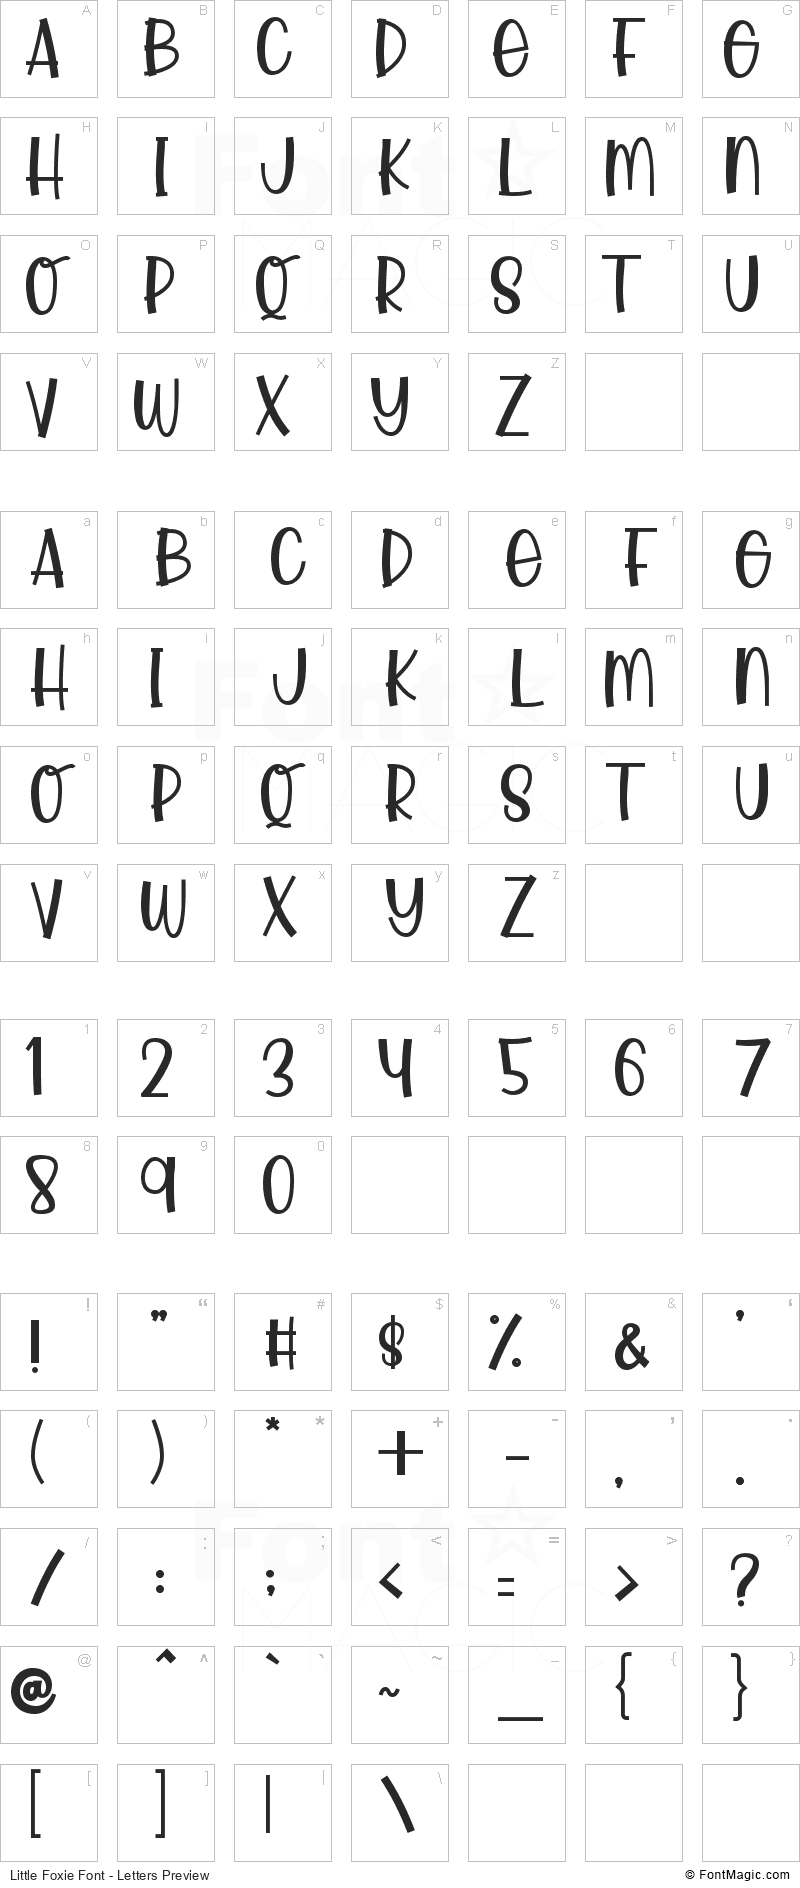 Little Foxie Font - All Latters Preview Chart